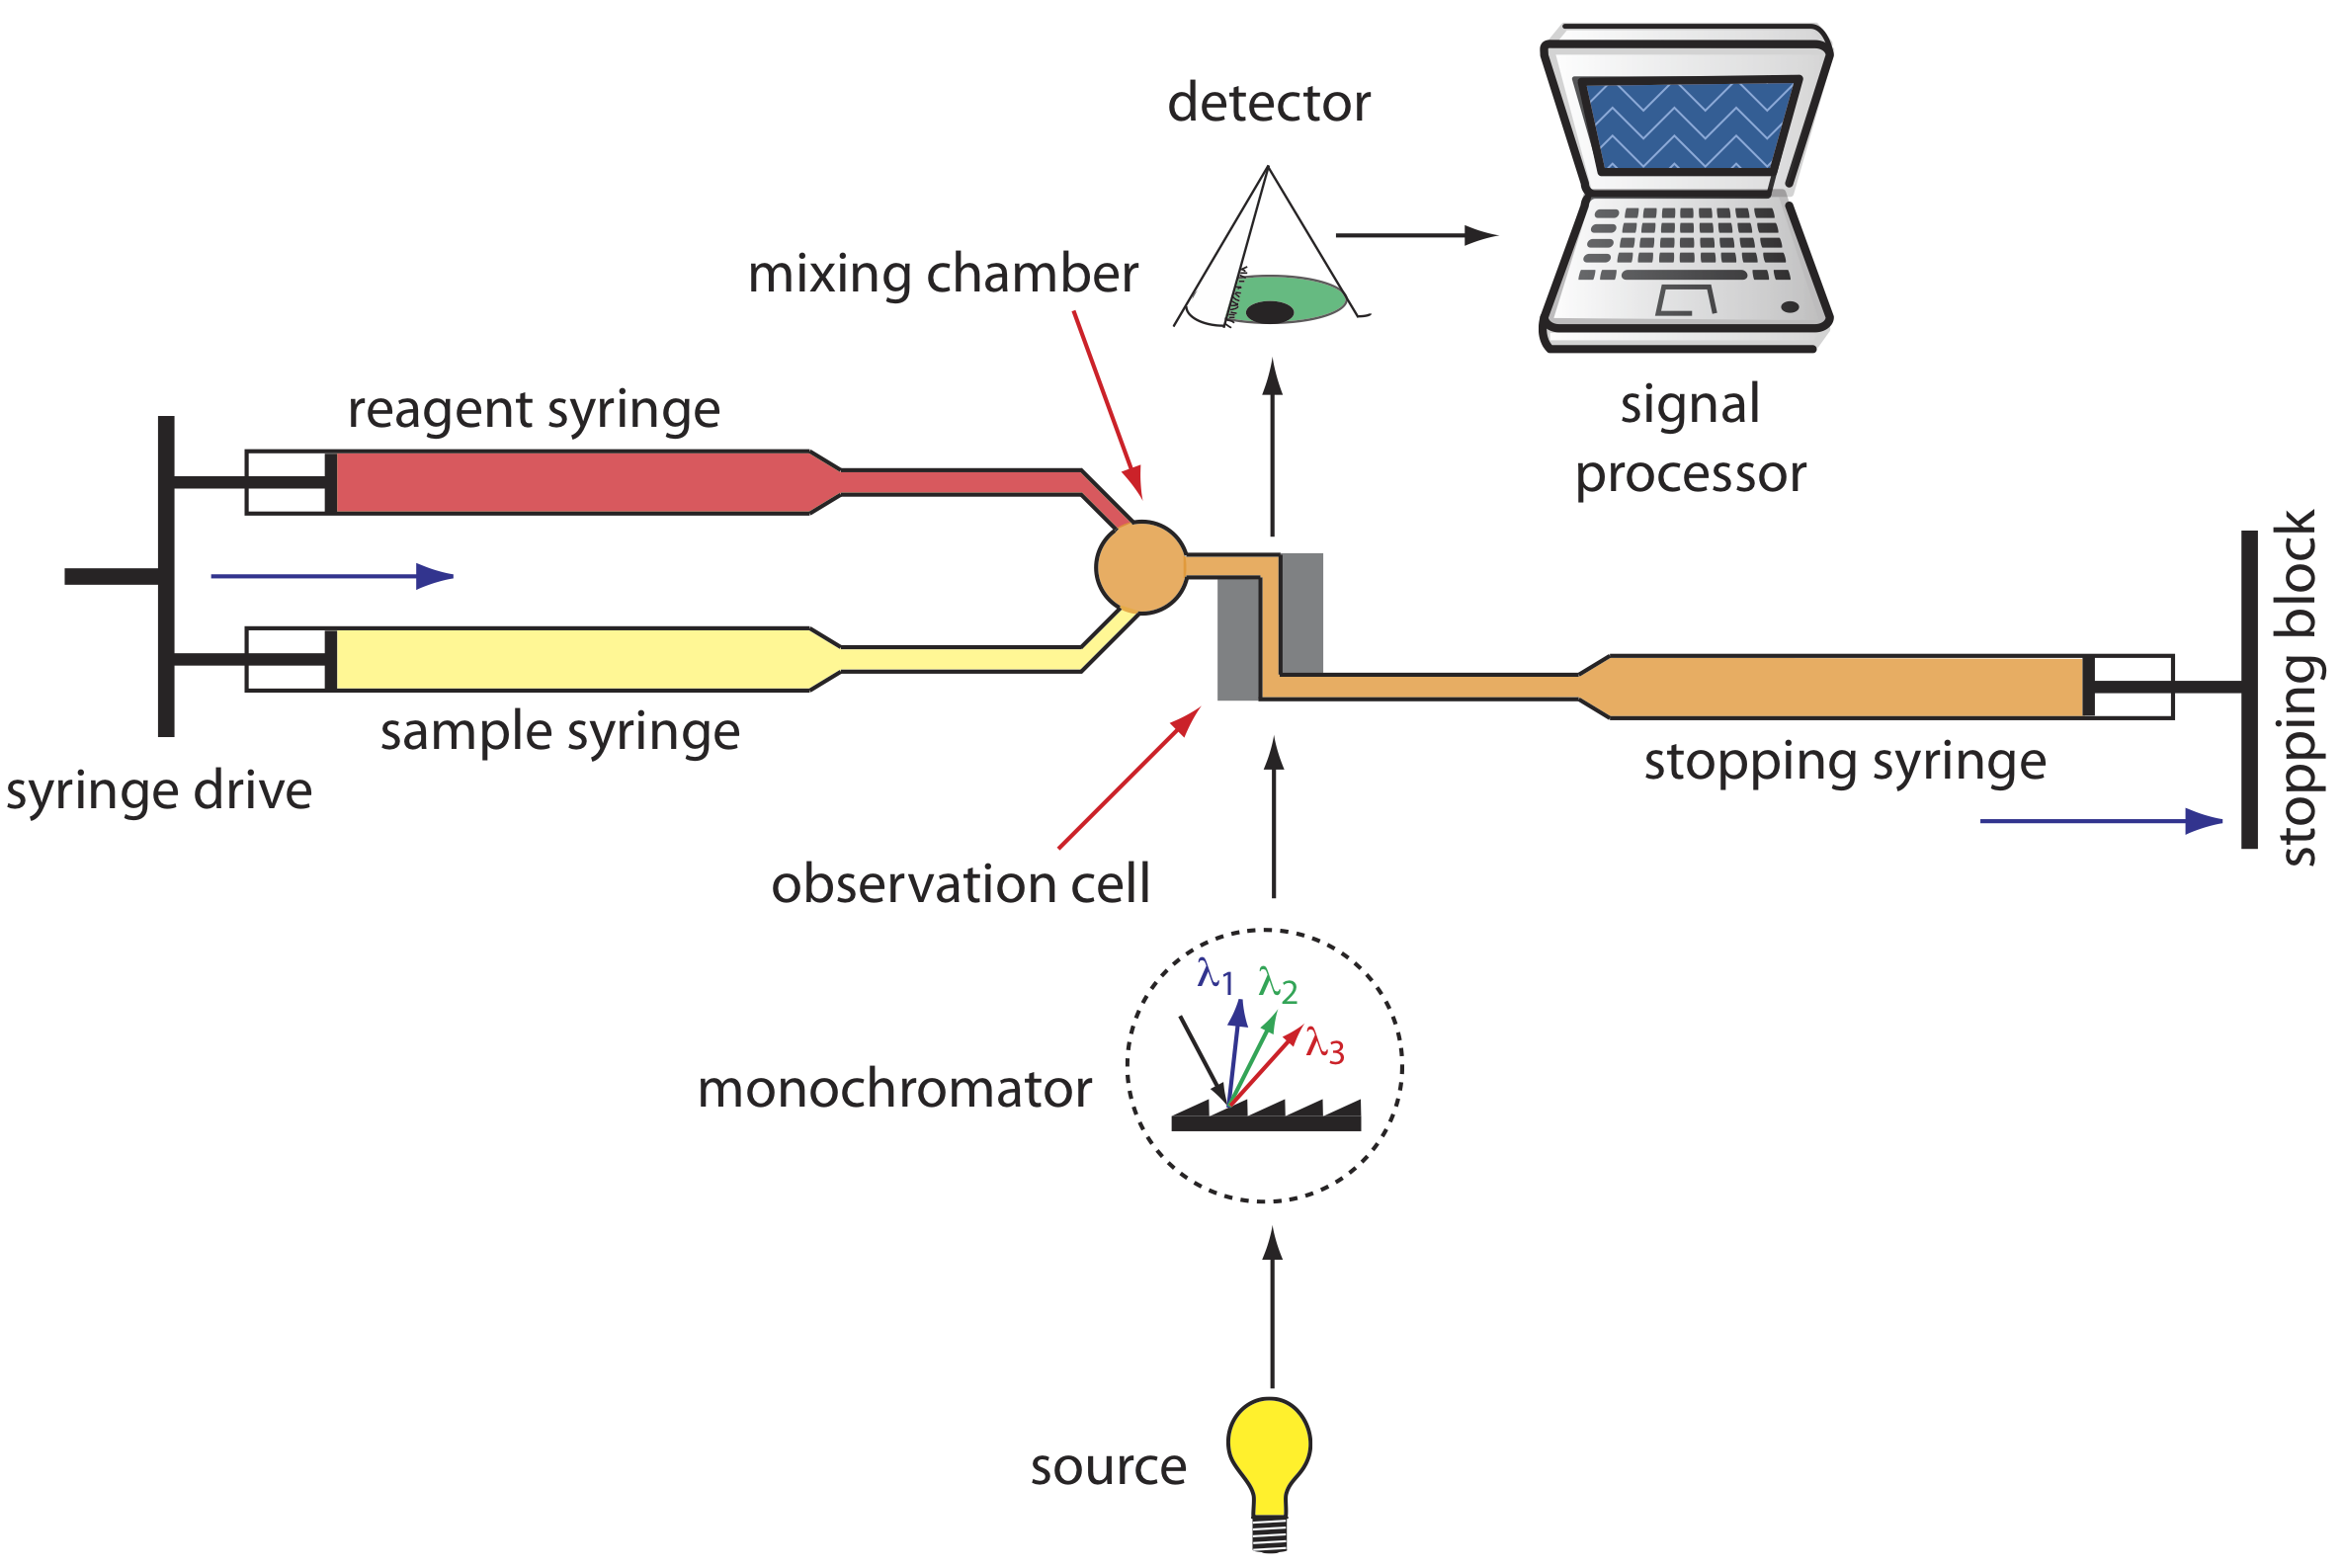 The diagram of the stopped-flow-analyzer begins with the syringe drive which pushes reagent and sample forward out of two syringes into a mixing chamber. From the mixing chamber, the mixed fluid moves into an observation cell where light that has passed through a monochromator moves through the mixed fluid and into a detector. The detector feeds results to a signal processor. The fluid does not move forward from the cell due to a stopping syringe at the end of the flow cycle.